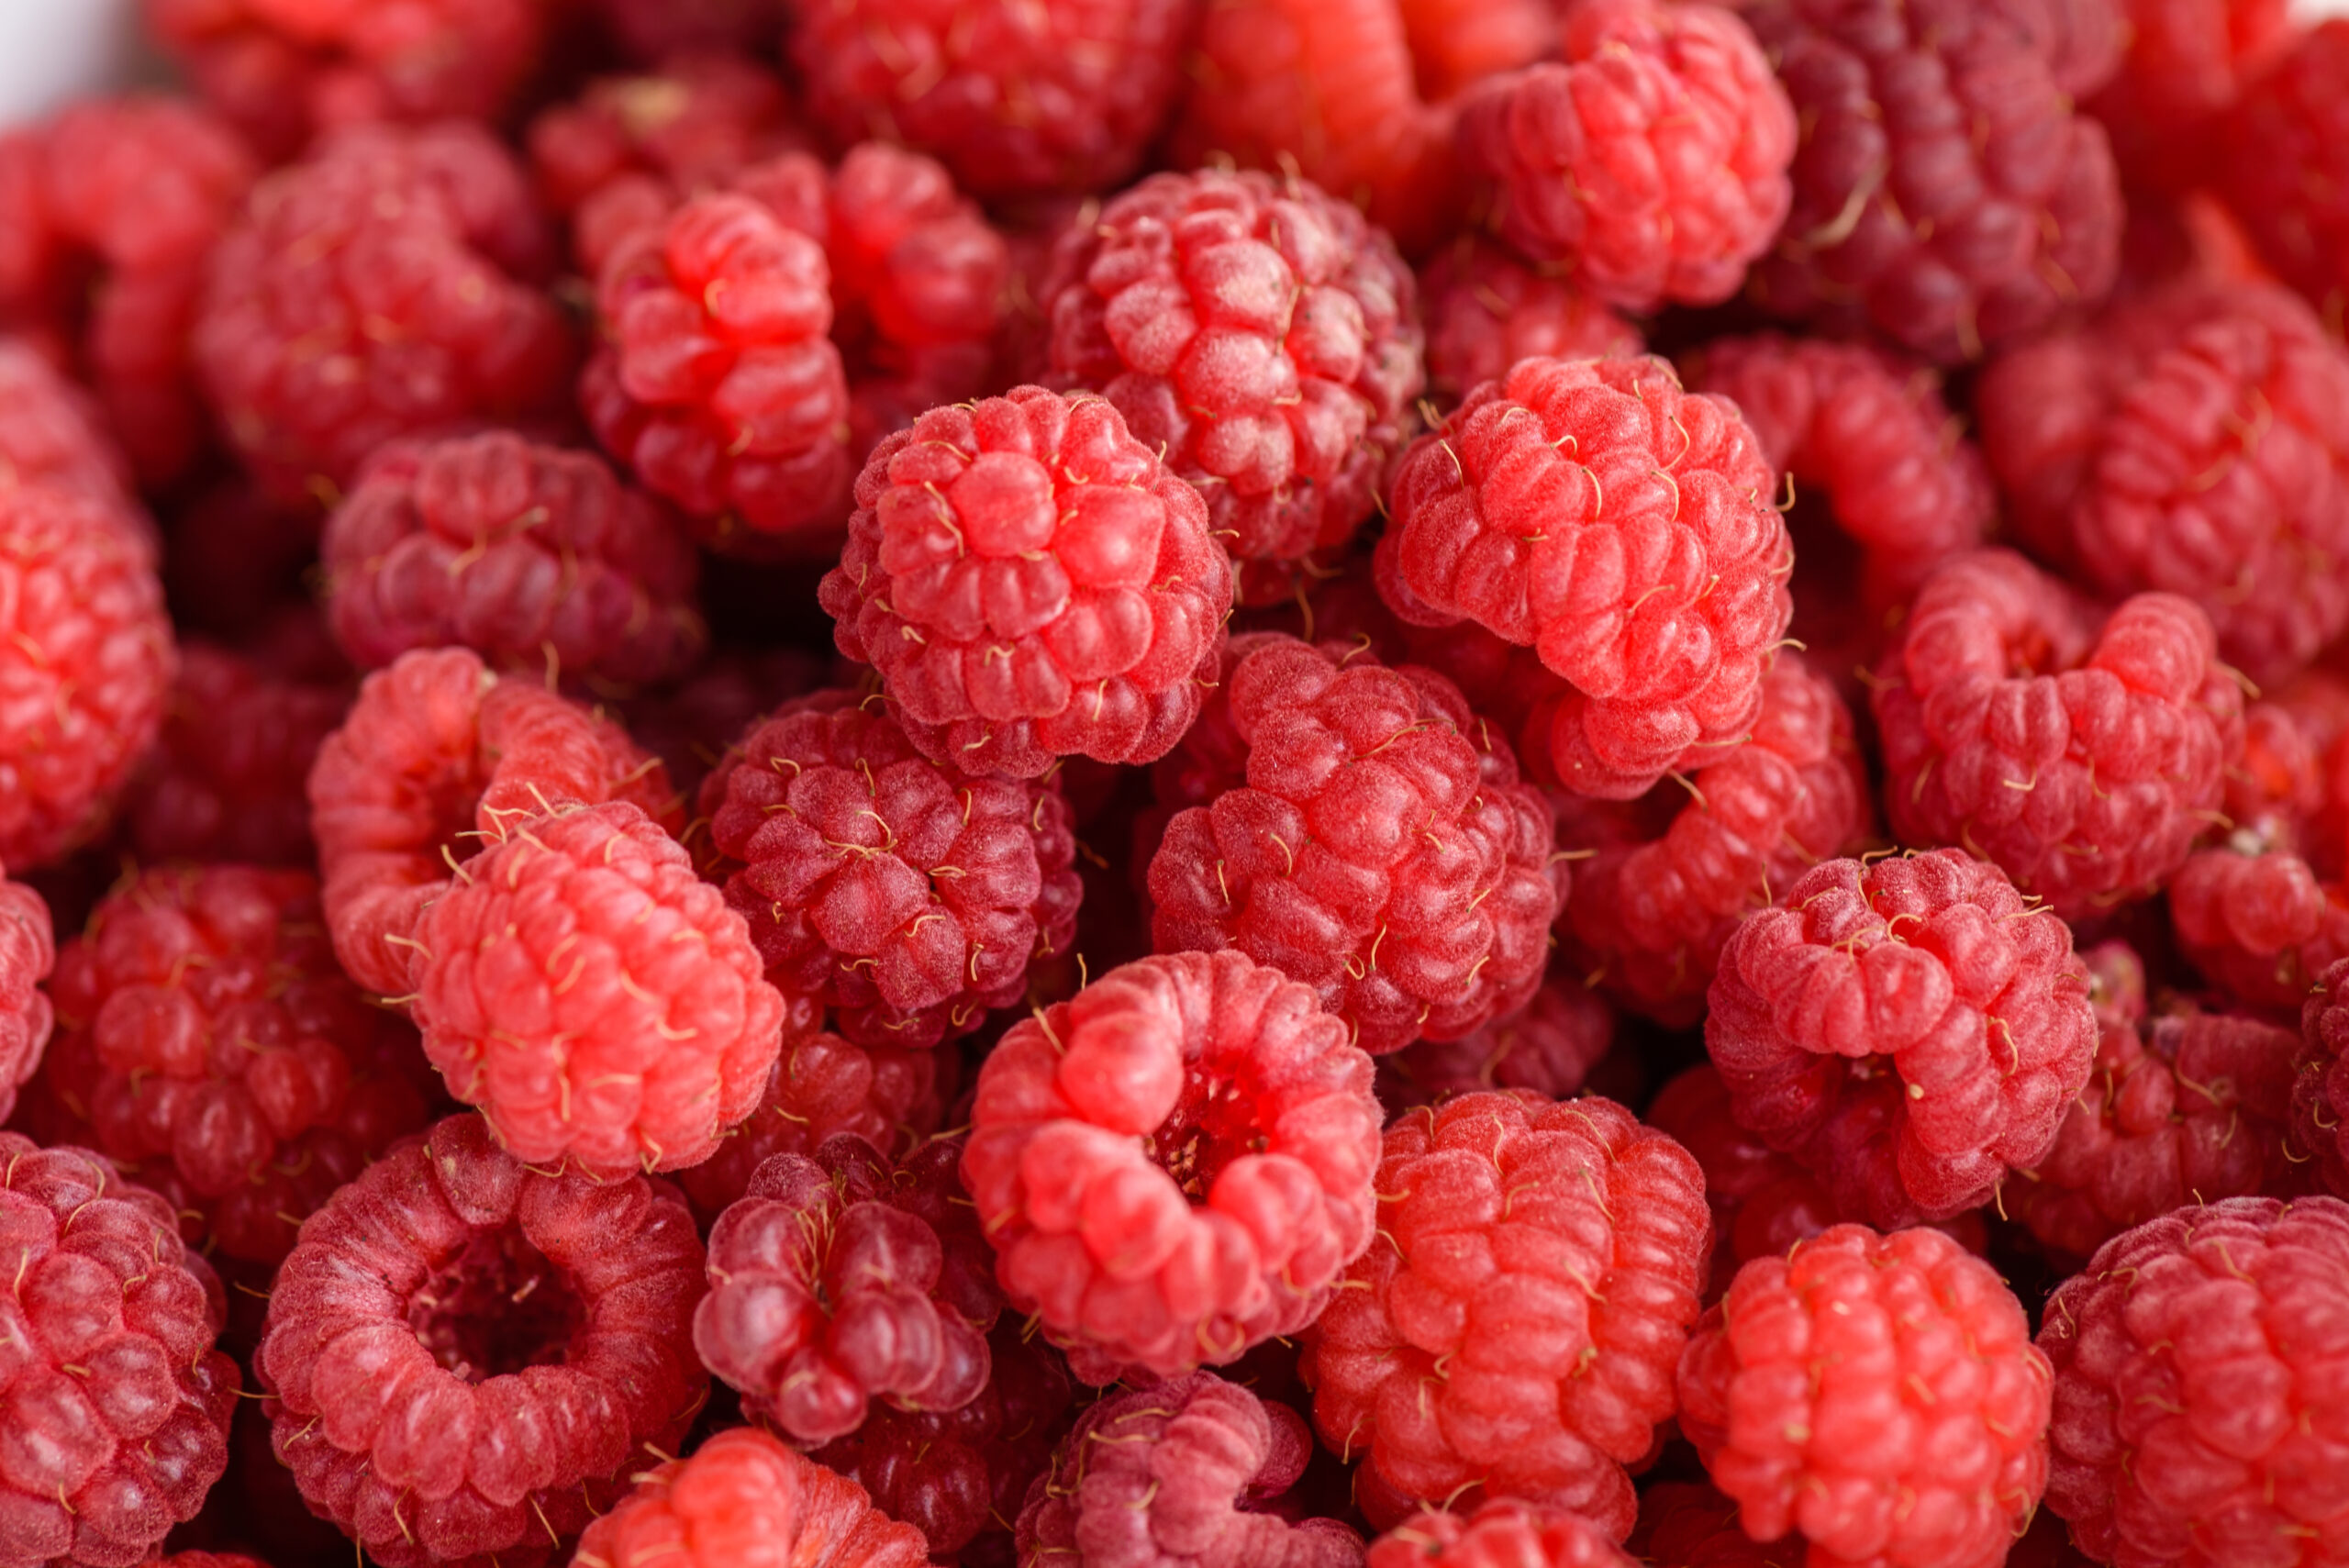 Just picked red and ripe raspberries background